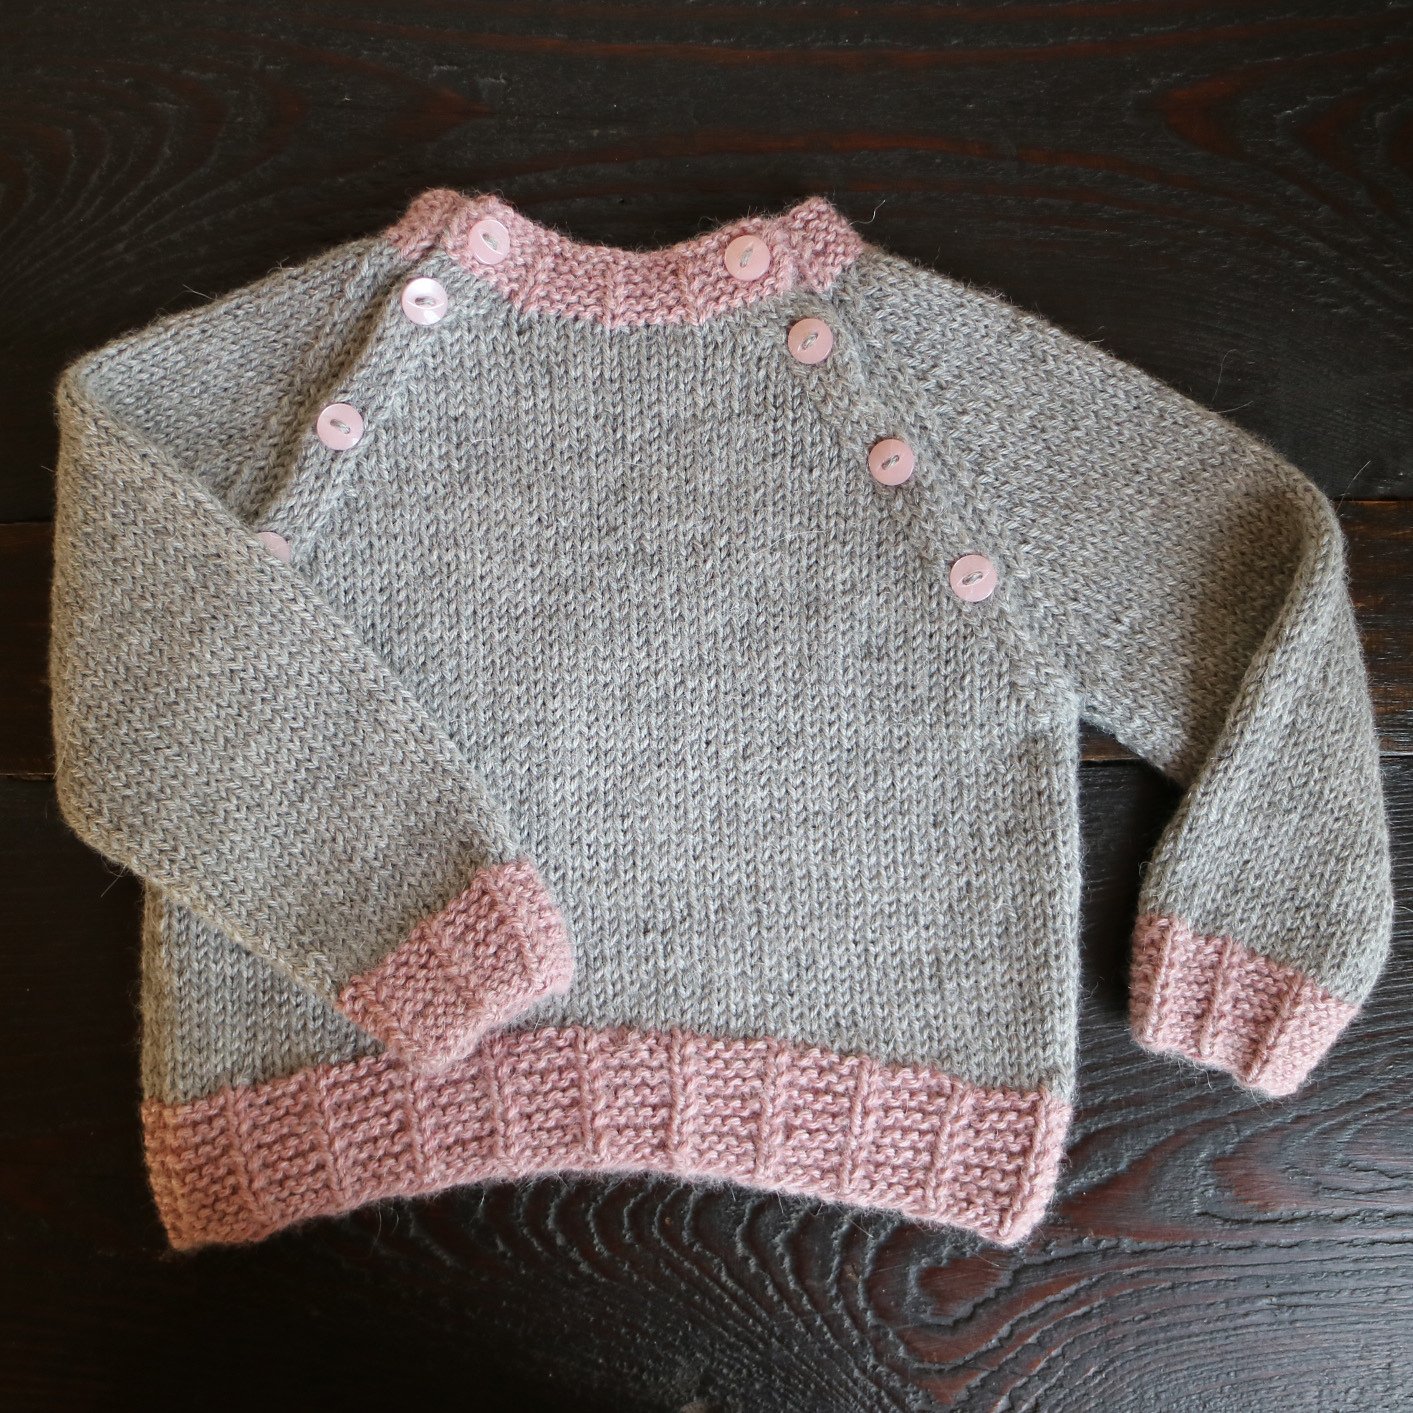 Patterns - Babies 0-24months - Button-snap baby sweater 5000